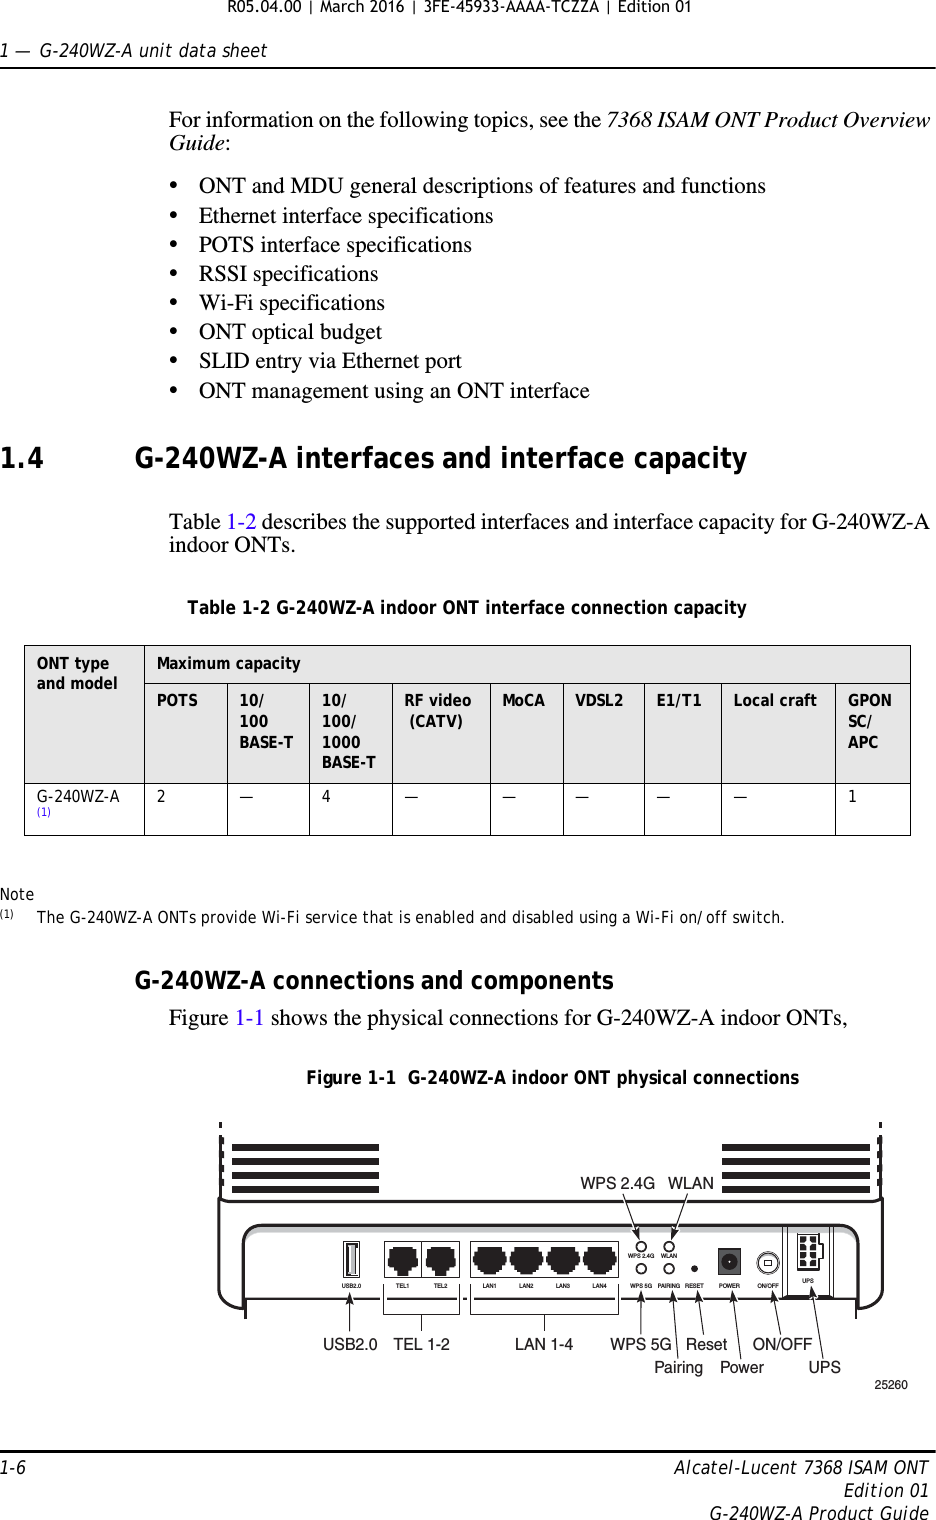 1 —  G-240WZ-A unit data sheet1-6 Alcatel-Lucent 7368 ISAM ONTEdition 01G-240WZ-A Product GuideFor information on the following topics, see the 7368 ISAM ONT Product Overview Guide:•ONT and MDU general descriptions of features and functions•Ethernet interface specifications•POTS interface specifications•RSSI specifications•Wi-Fi specifications•ONT optical budget•SLID entry via Ethernet port•ONT management using an ONT interface1.4 G-240WZ-A interfaces and interface capacityTable 1-2 describes the supported interfaces and interface capacity for G-240WZ-A indoor ONTs.Table 1-2 G-240WZ-A indoor ONT interface connection capacityNote(1) The G-240WZ-A ONTs provide Wi-Fi service that is enabled and disabled using a Wi-Fi on/off switch. G-240WZ-A connections and componentsFigure 1-1 shows the physical connections for G-240WZ-A indoor ONTs, Figure 1-1  G-240WZ-A indoor ONT physical connectionsONT type and model  Maximum capacityPOTS 10/ 100BASE-T10/ 100/ 1000 BASE-TRF video (CATV) MoCA VDSL2 E1/T1 Local craft GPONSC/APCG-240WZ-A (1) 2—4— ———— 125260USB2.0 TEL 1-2 LAN 1-4WPS 2.4G WLANWPS 5GPairingResetPowerON/OFFUPSUSB2.0 TEL1 TEL2 LAN1 LAN2 LAN3LAN4WPS 2.4G WLANWPS 5G PAIRING RESET POWER ON/OFF UPSR05.04.00 | March 2016 | 3FE-45933-AAAA-TCZZA | Edition 01 